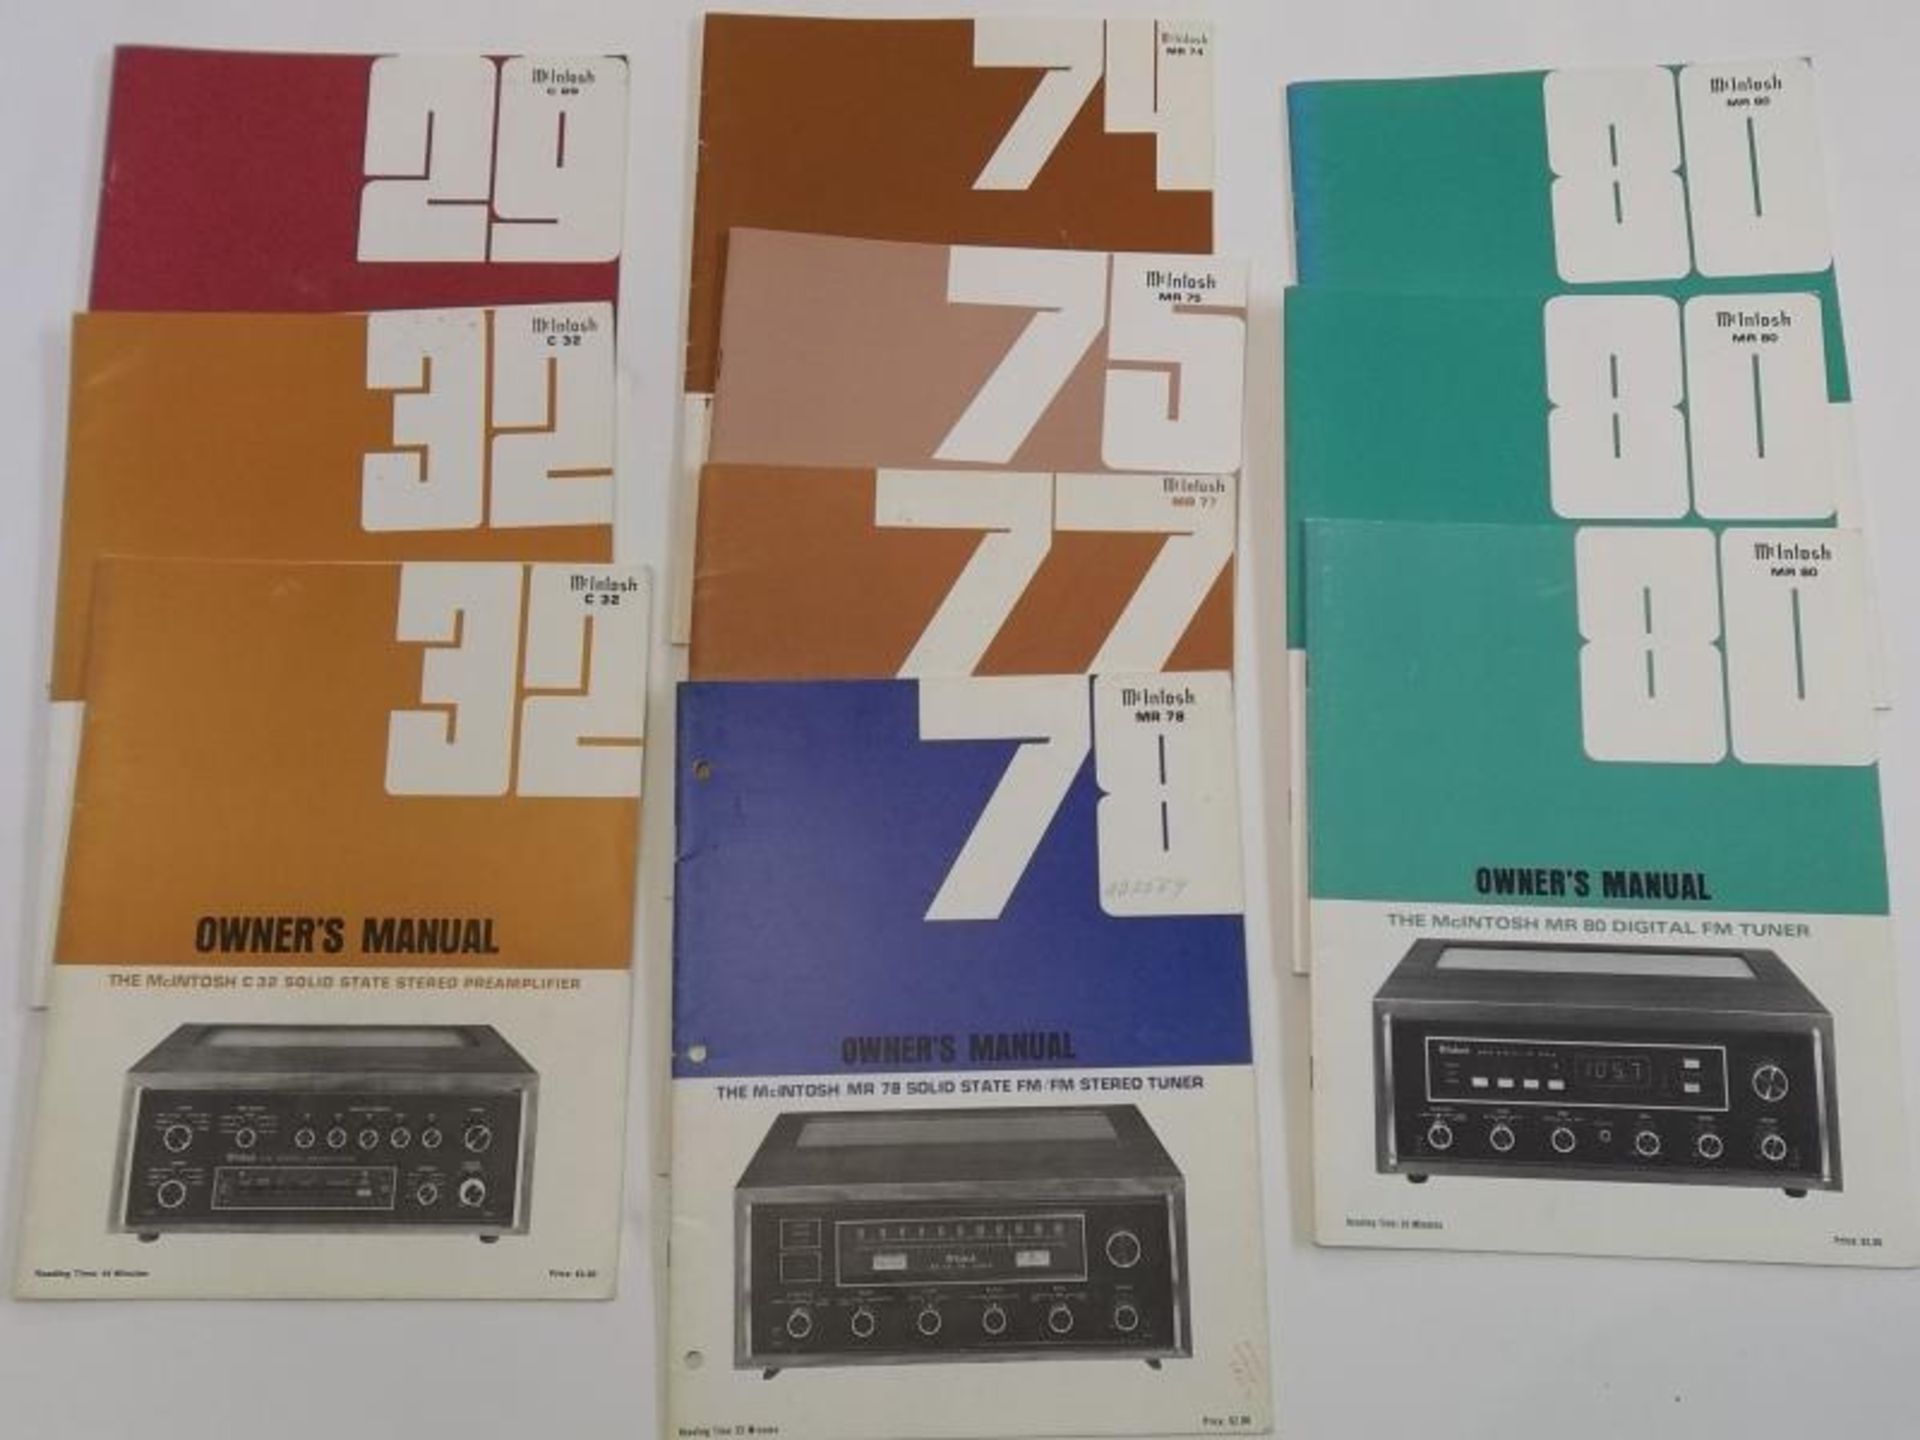 Lot of 12 McIntosh owner's manual (3) for preamp (1) C29, (2) C32, and (7) FM Stereo Tuner owner's